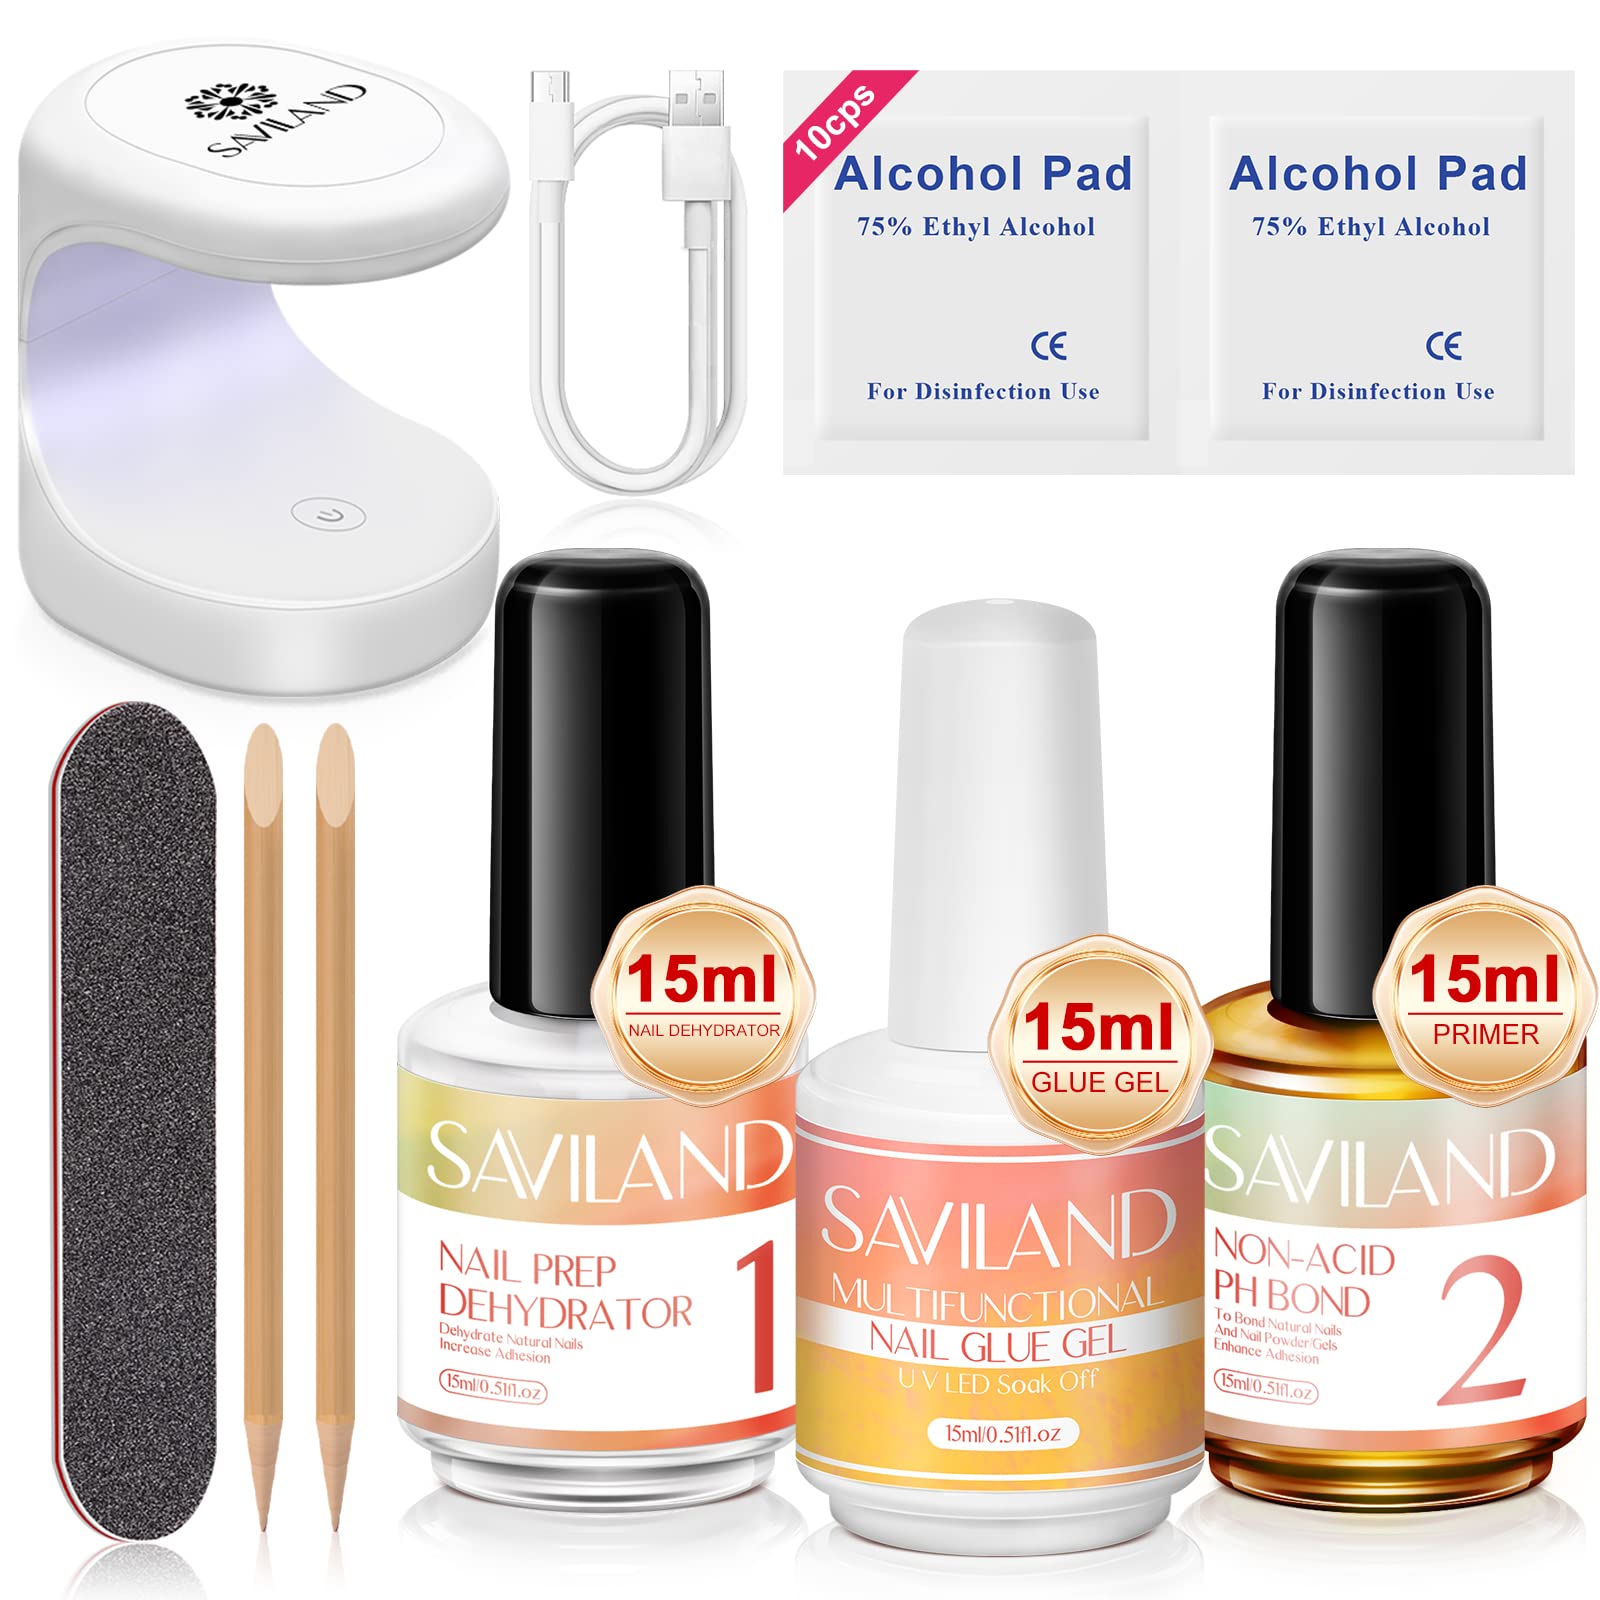 Grab this Set of Lint Free Nail Wipes at the Most Affordable Price!